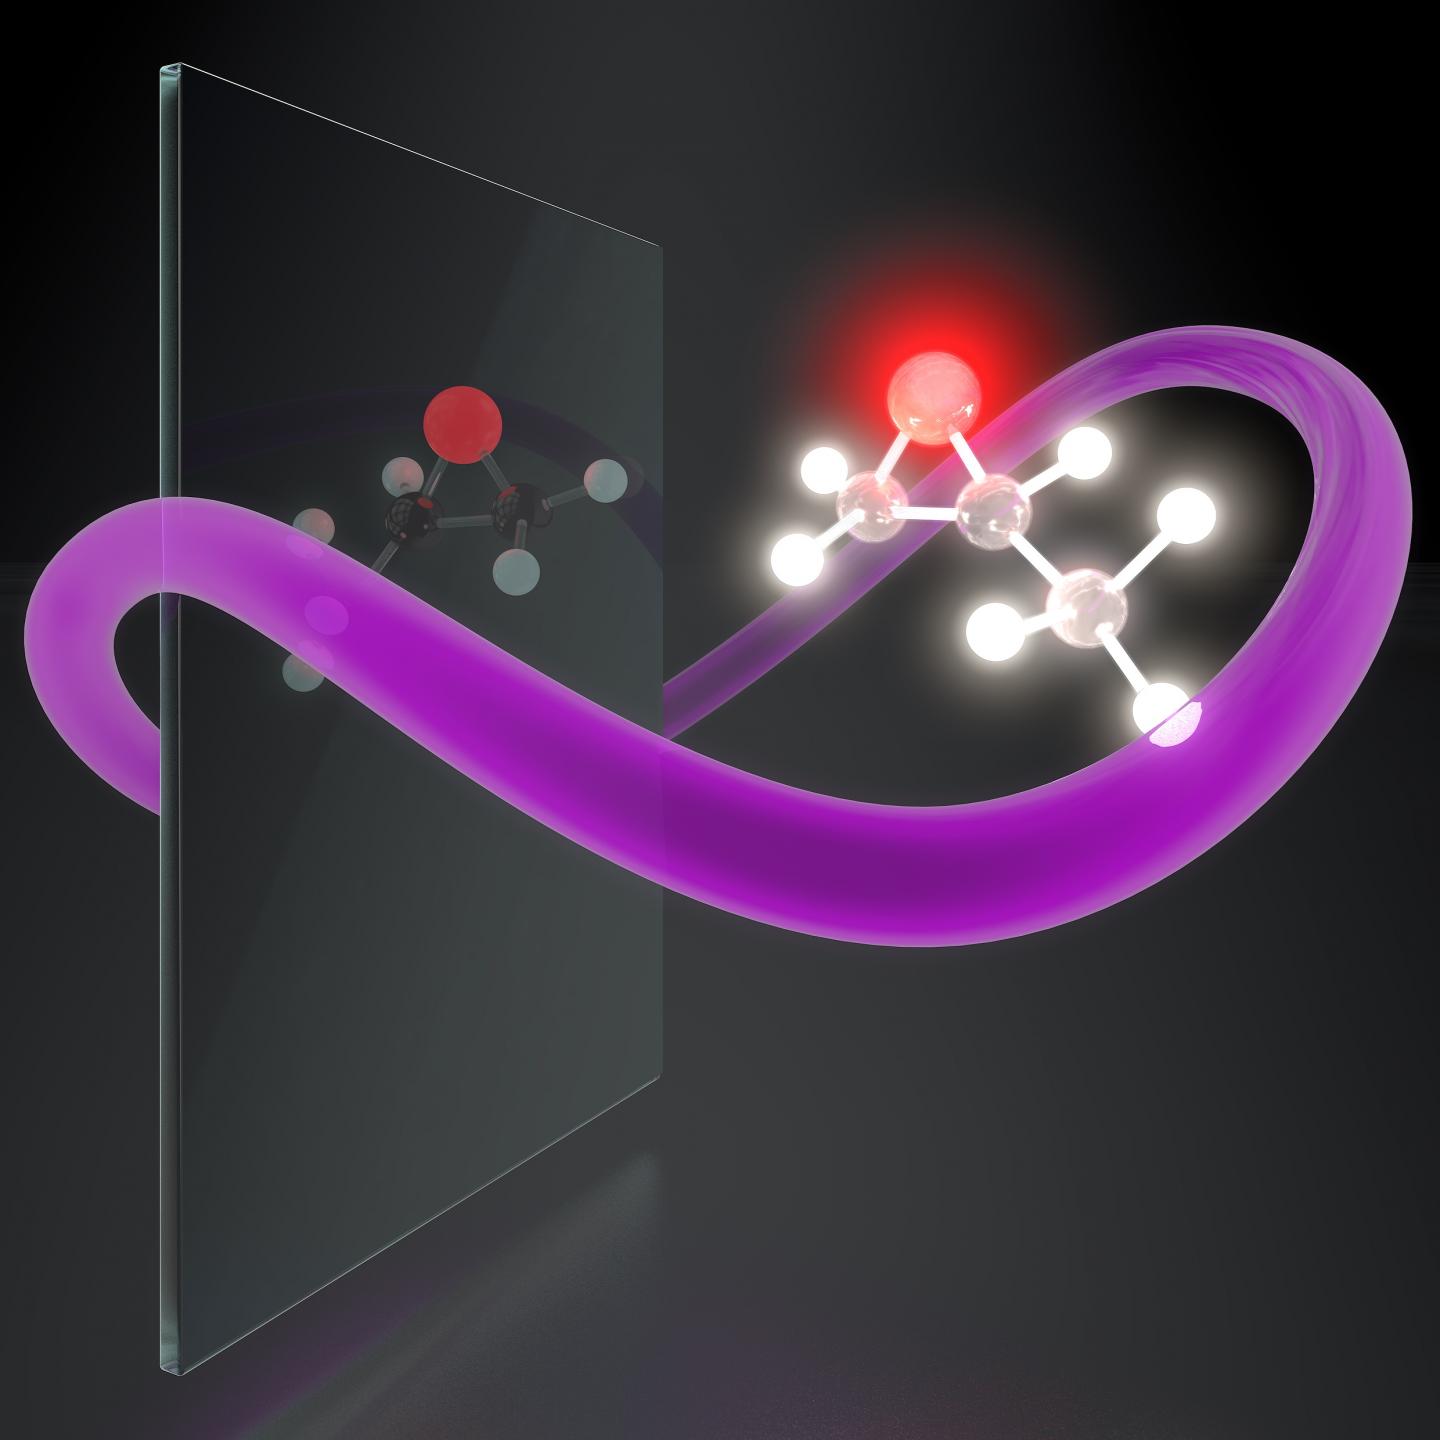 Synthesized Light Enables Control of Chiral Light-Matter Interactions